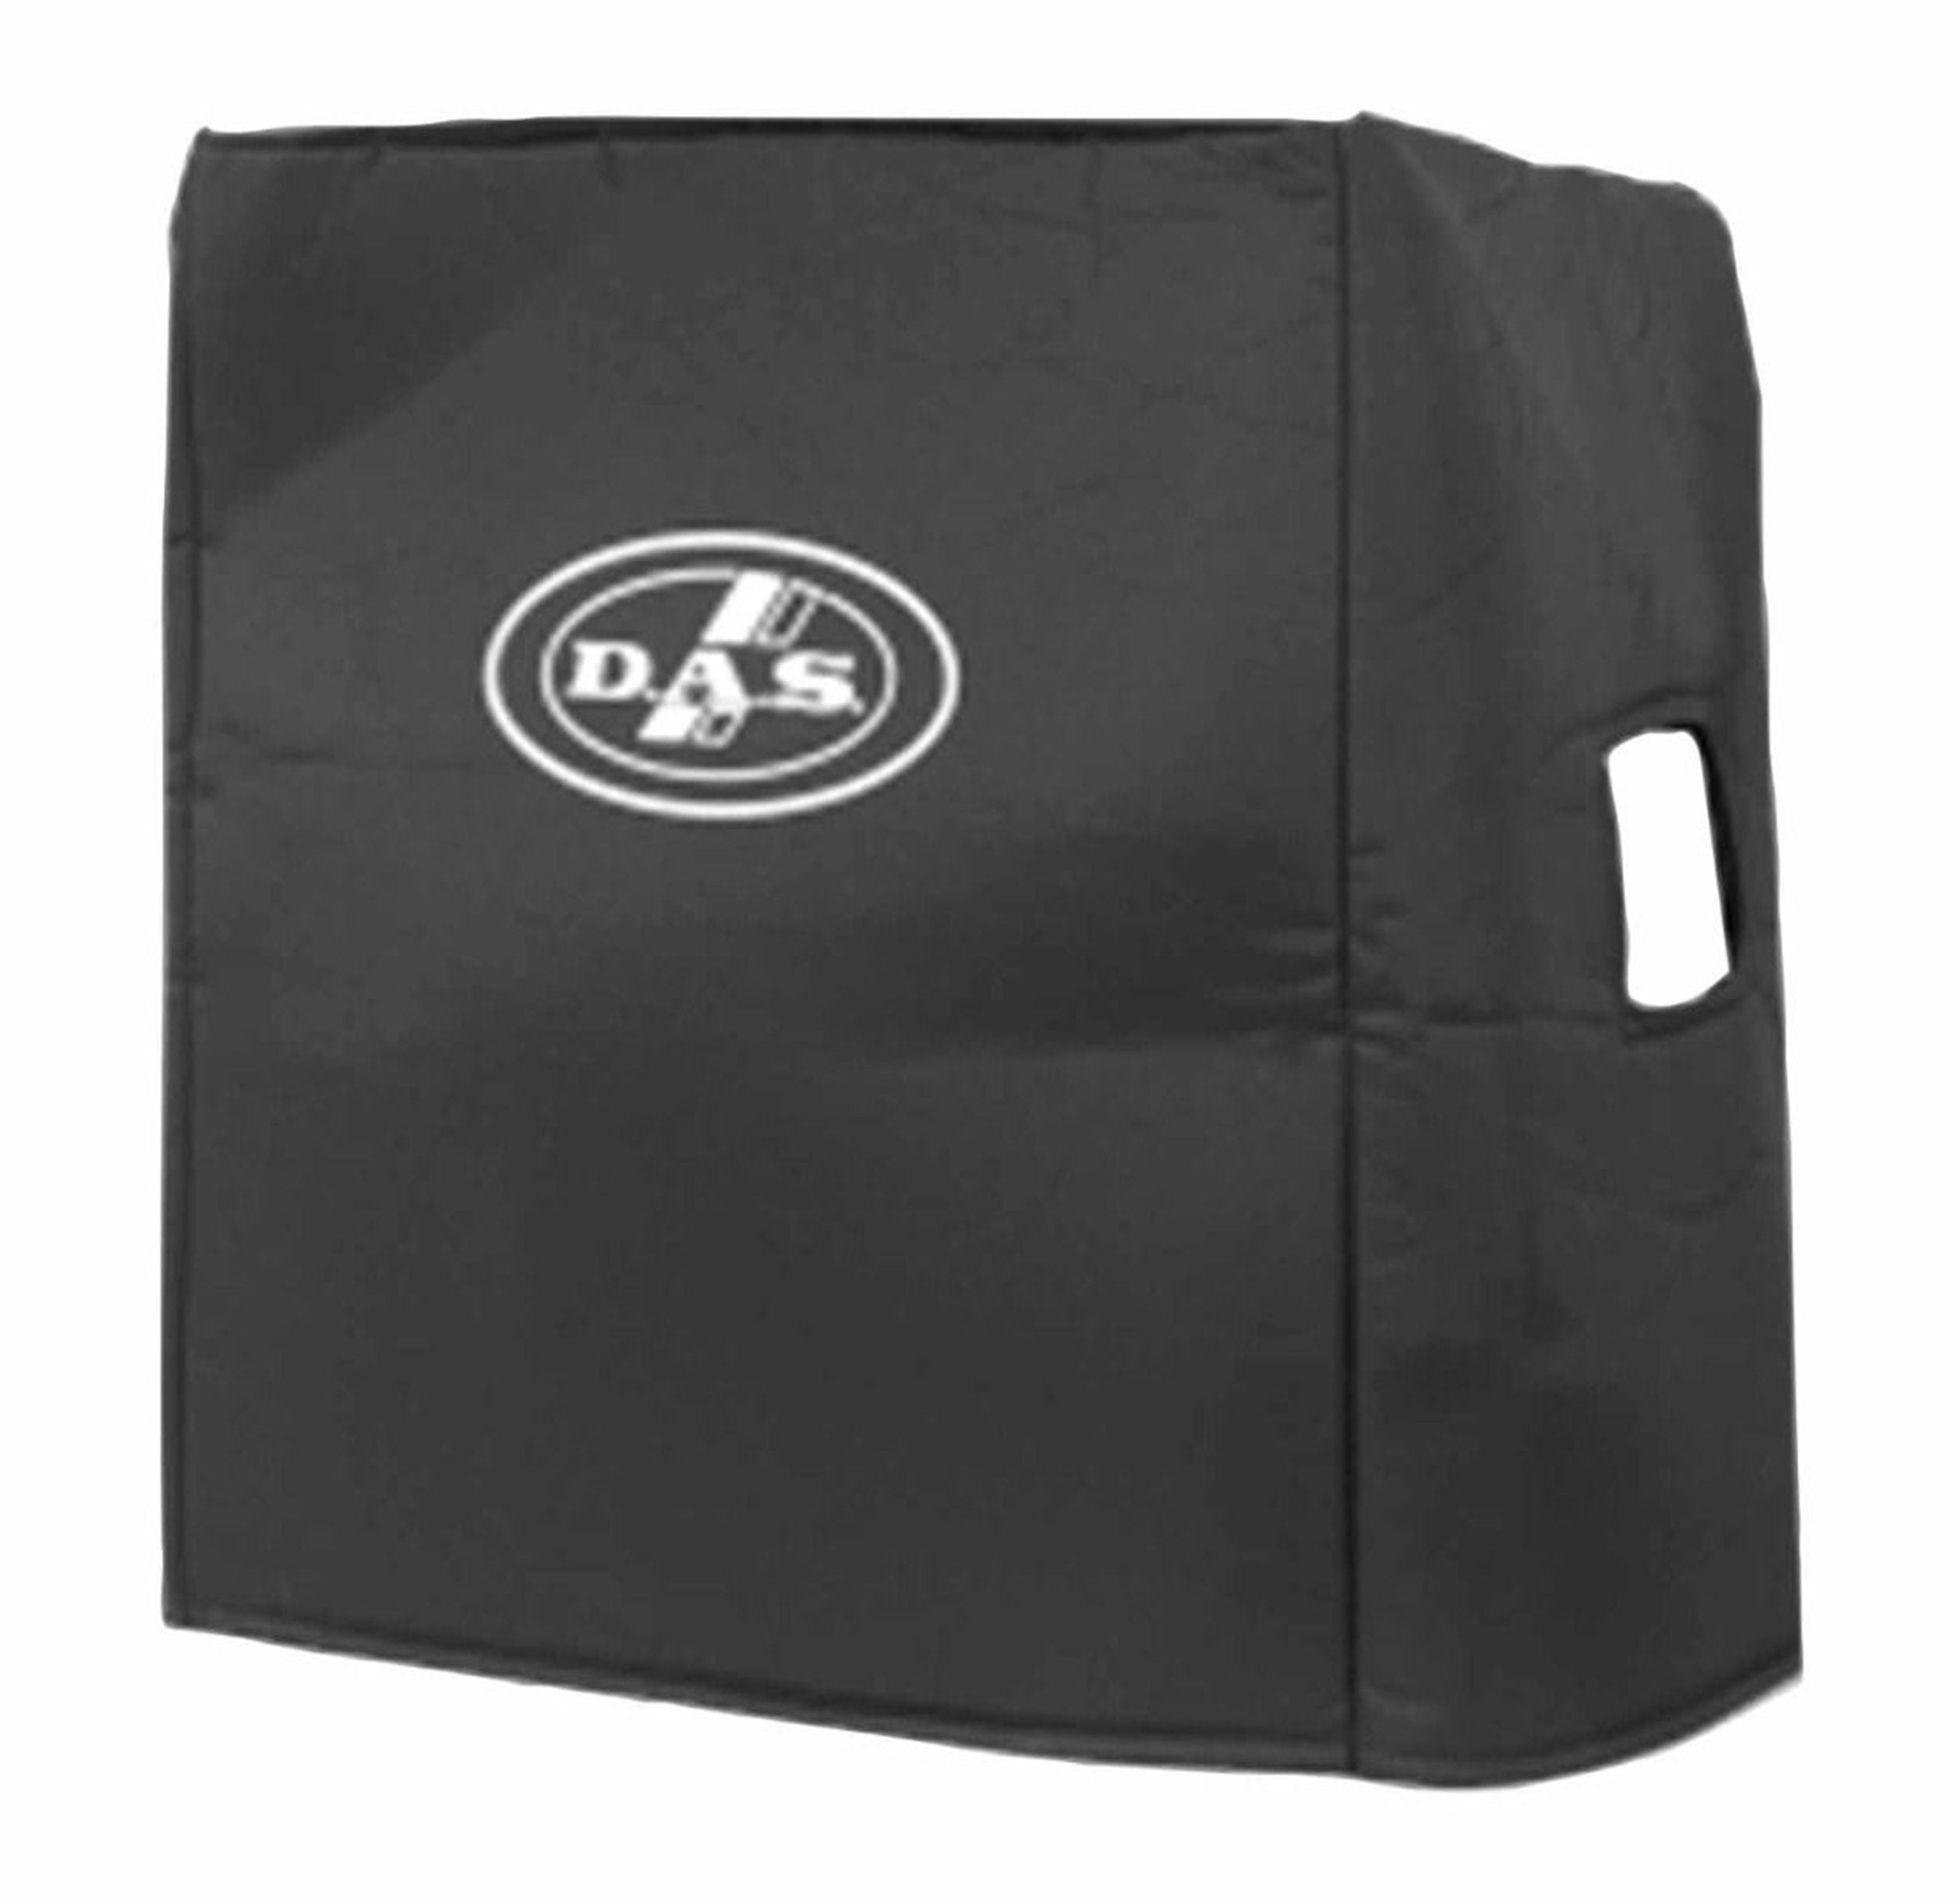 DAS Audio FUN-2-EV121, Black Protective Transport Cover for 2 Units of EVENT-121A on PL-EV121S by DAS Audio